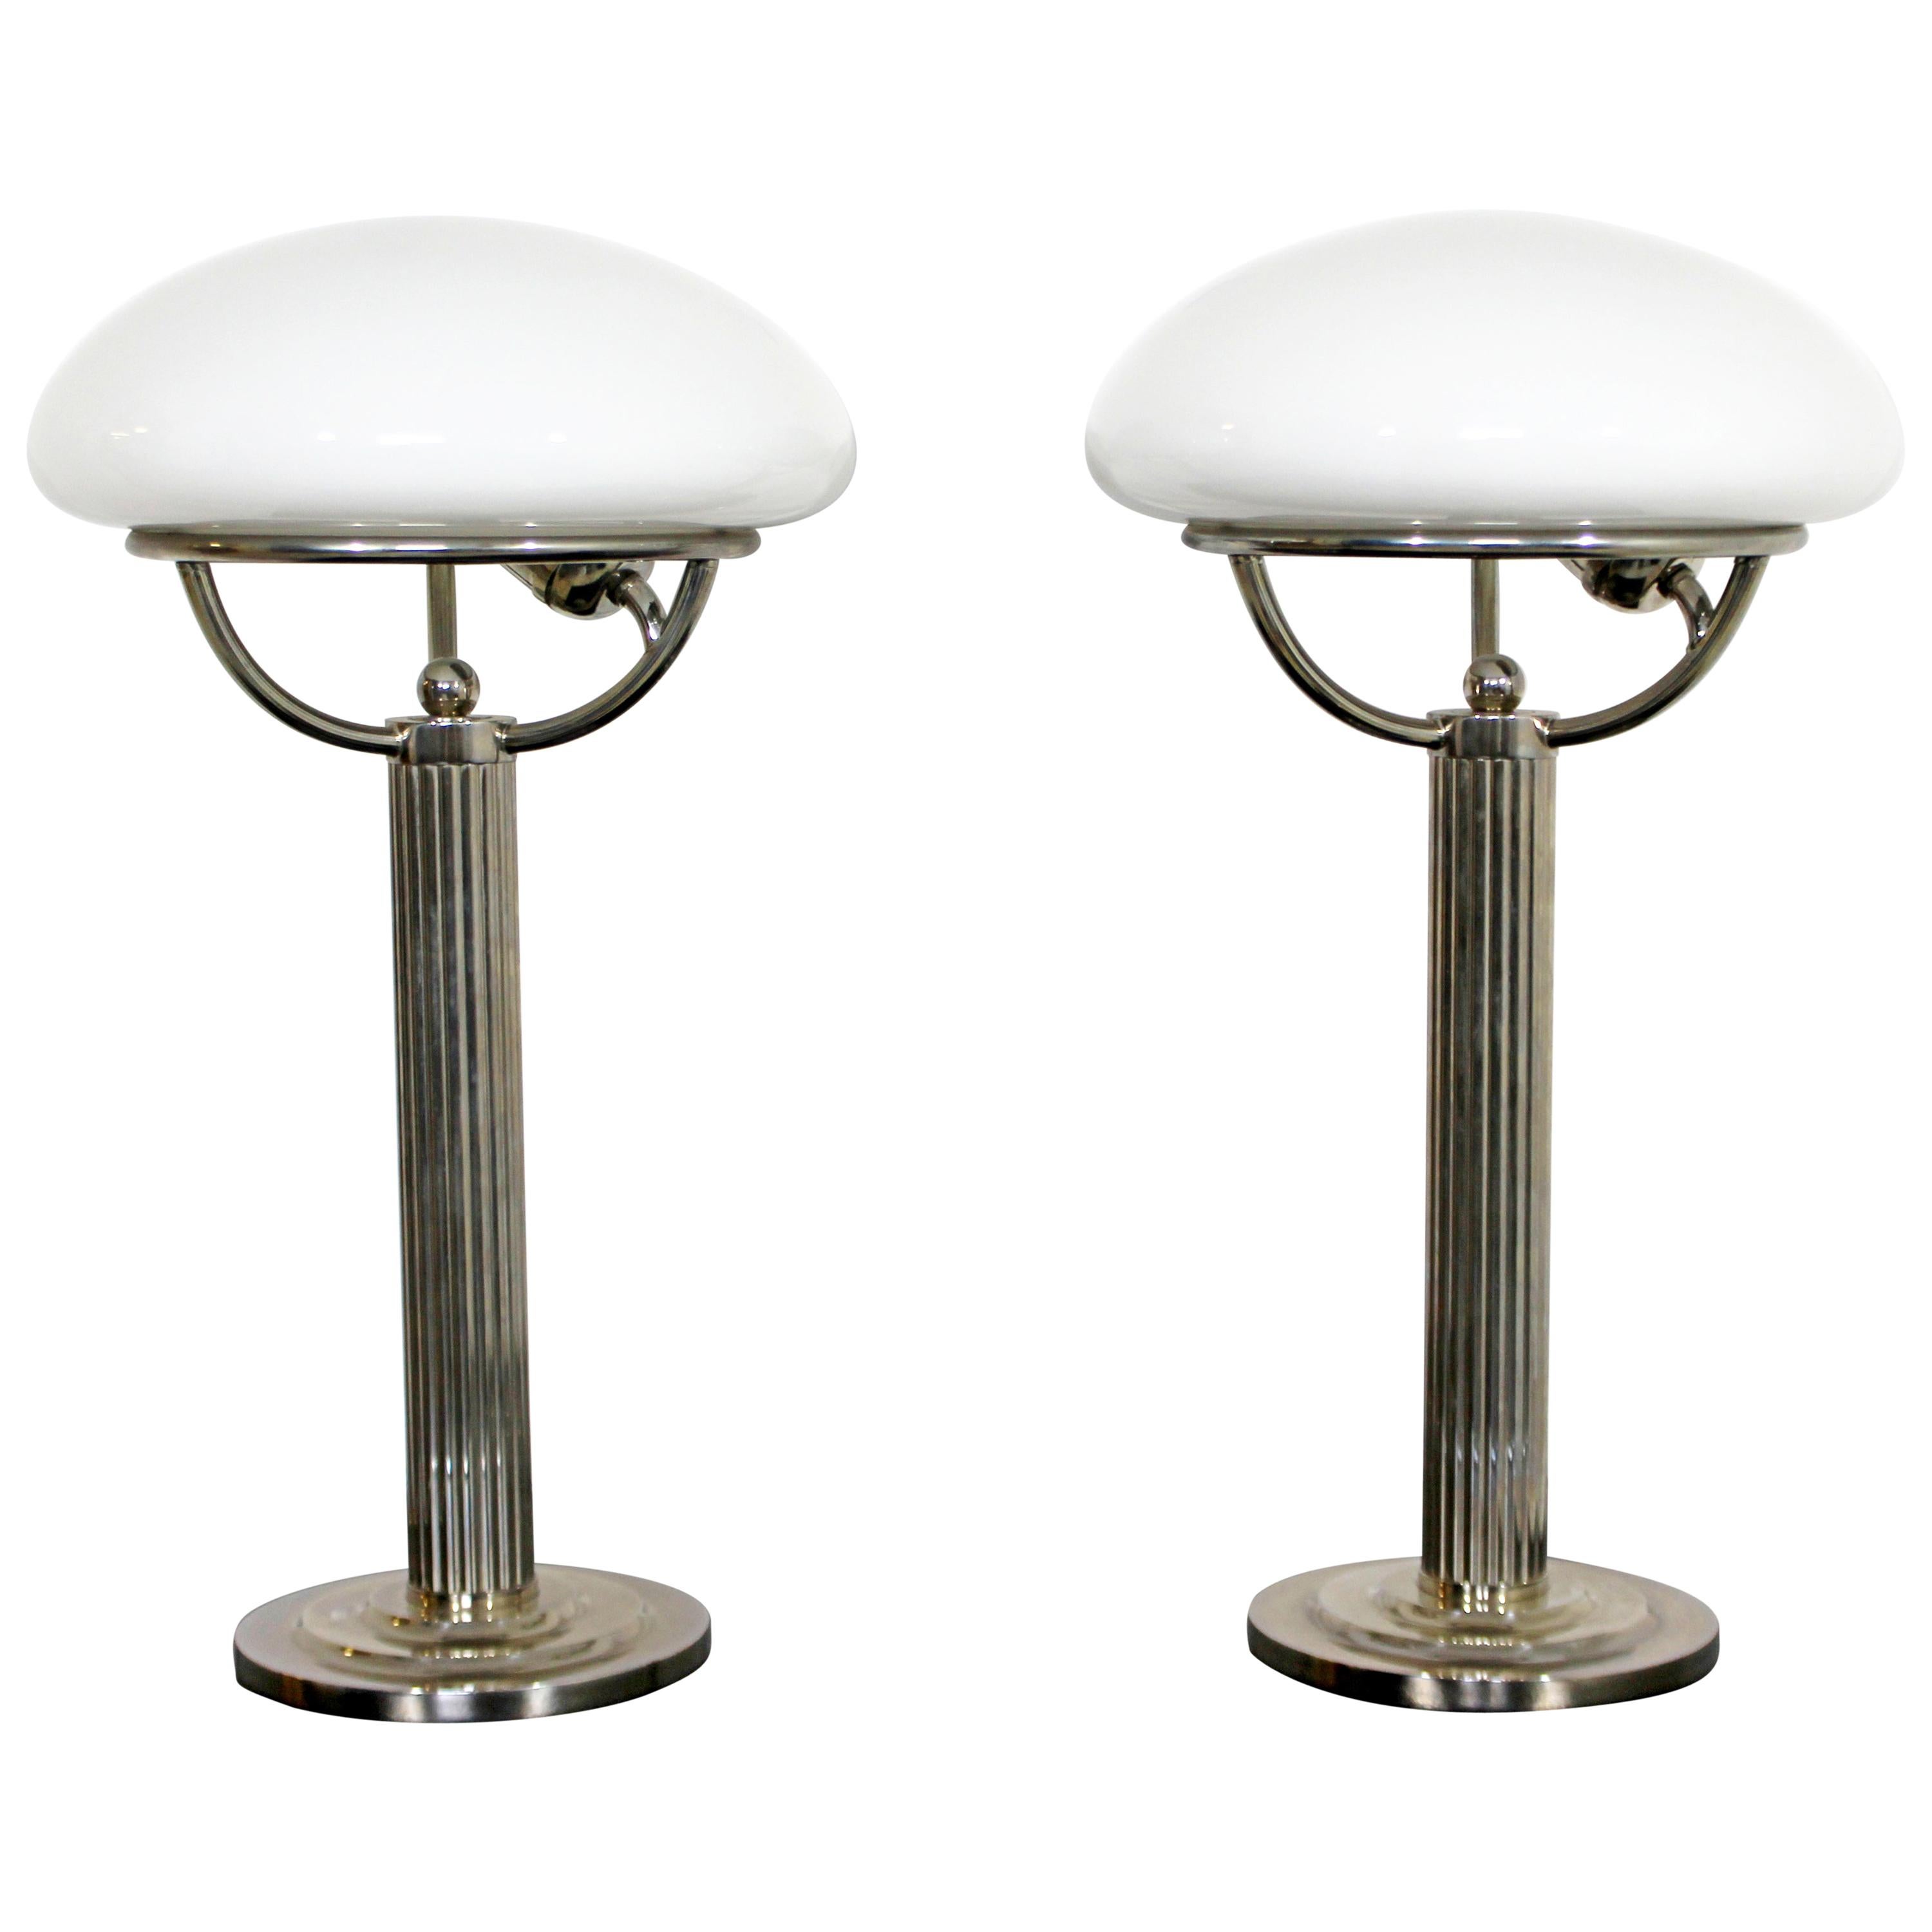 Art Deco Pair of Chrome & Glass Table Lamps, Adolf Loos, Early 20th Century 1910